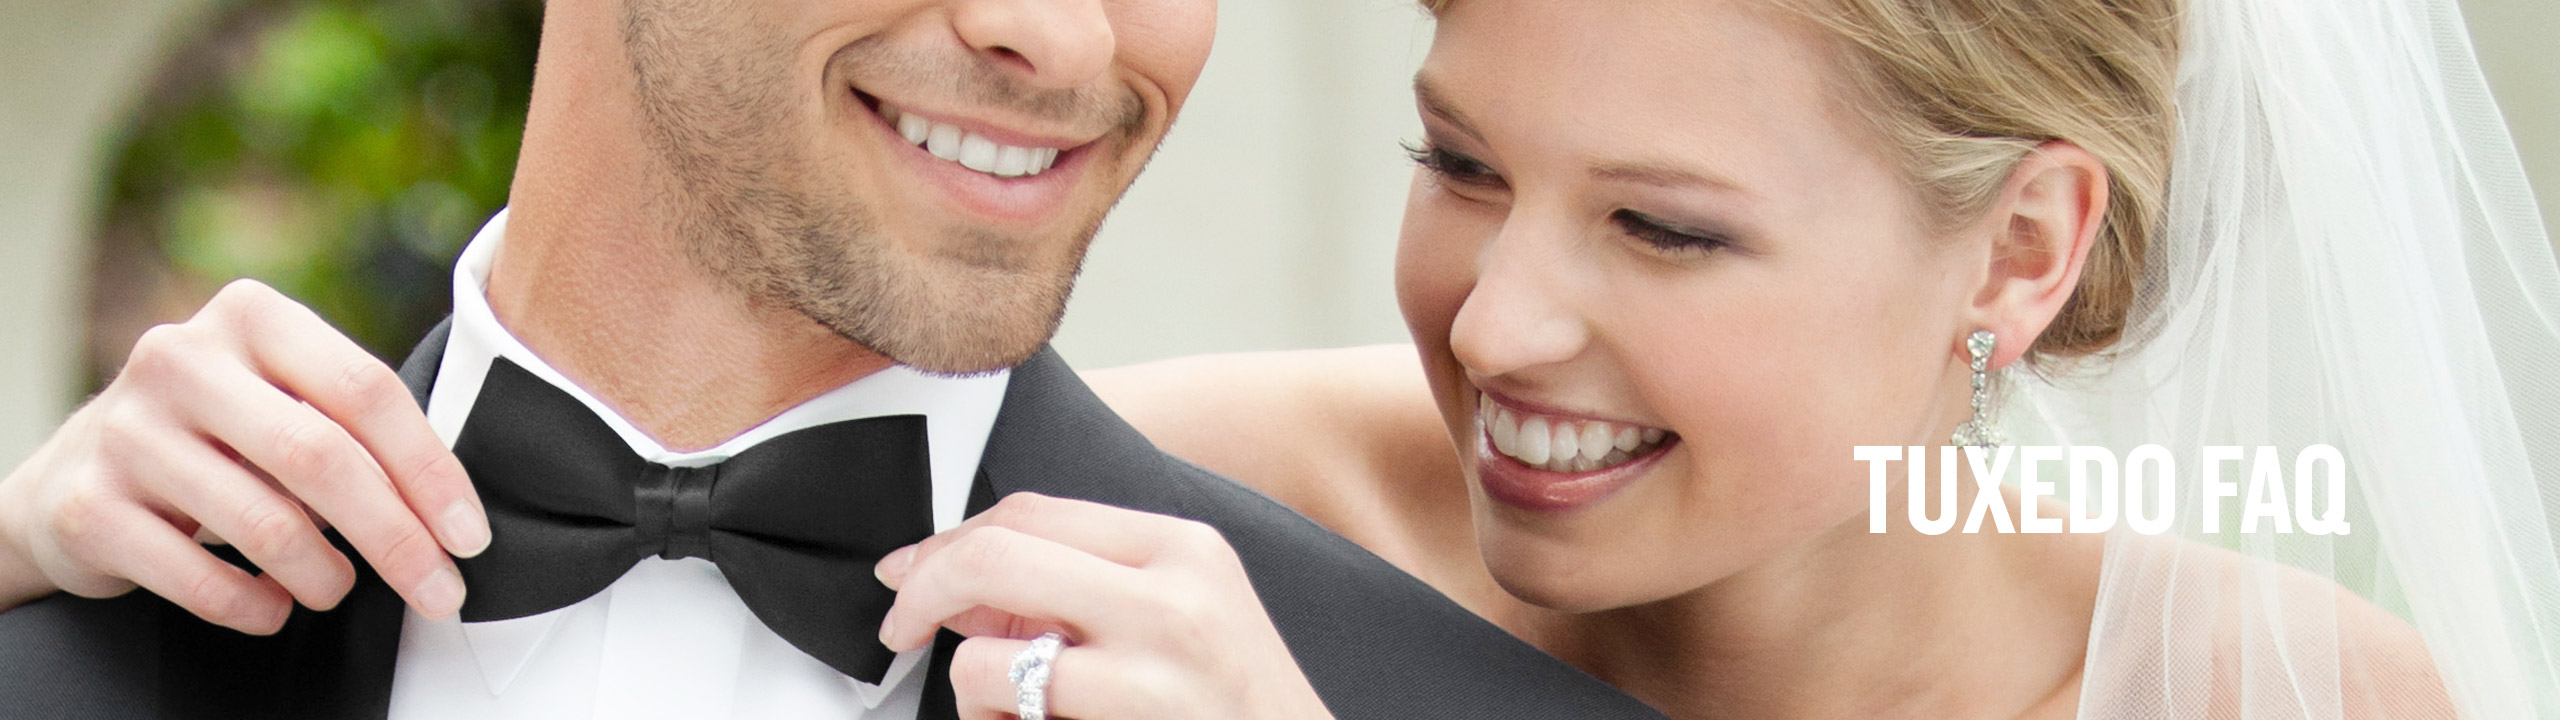 Tuxedo & Suit Rental Fitting Guide